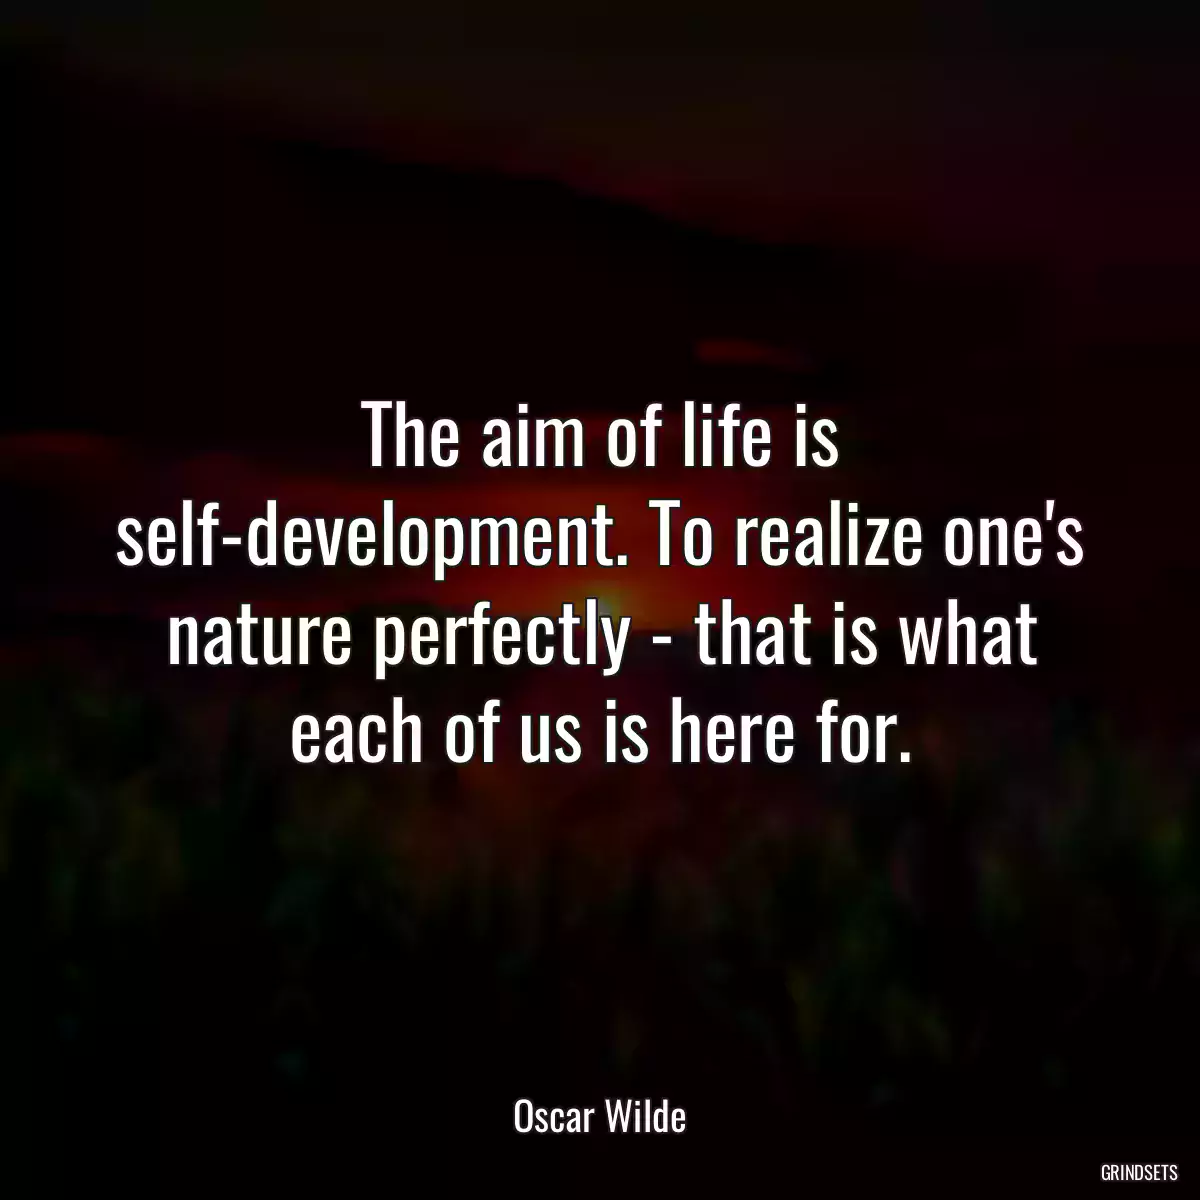 The aim of life is self-development. To realize one\'s nature perfectly - that is what each of us is here for.